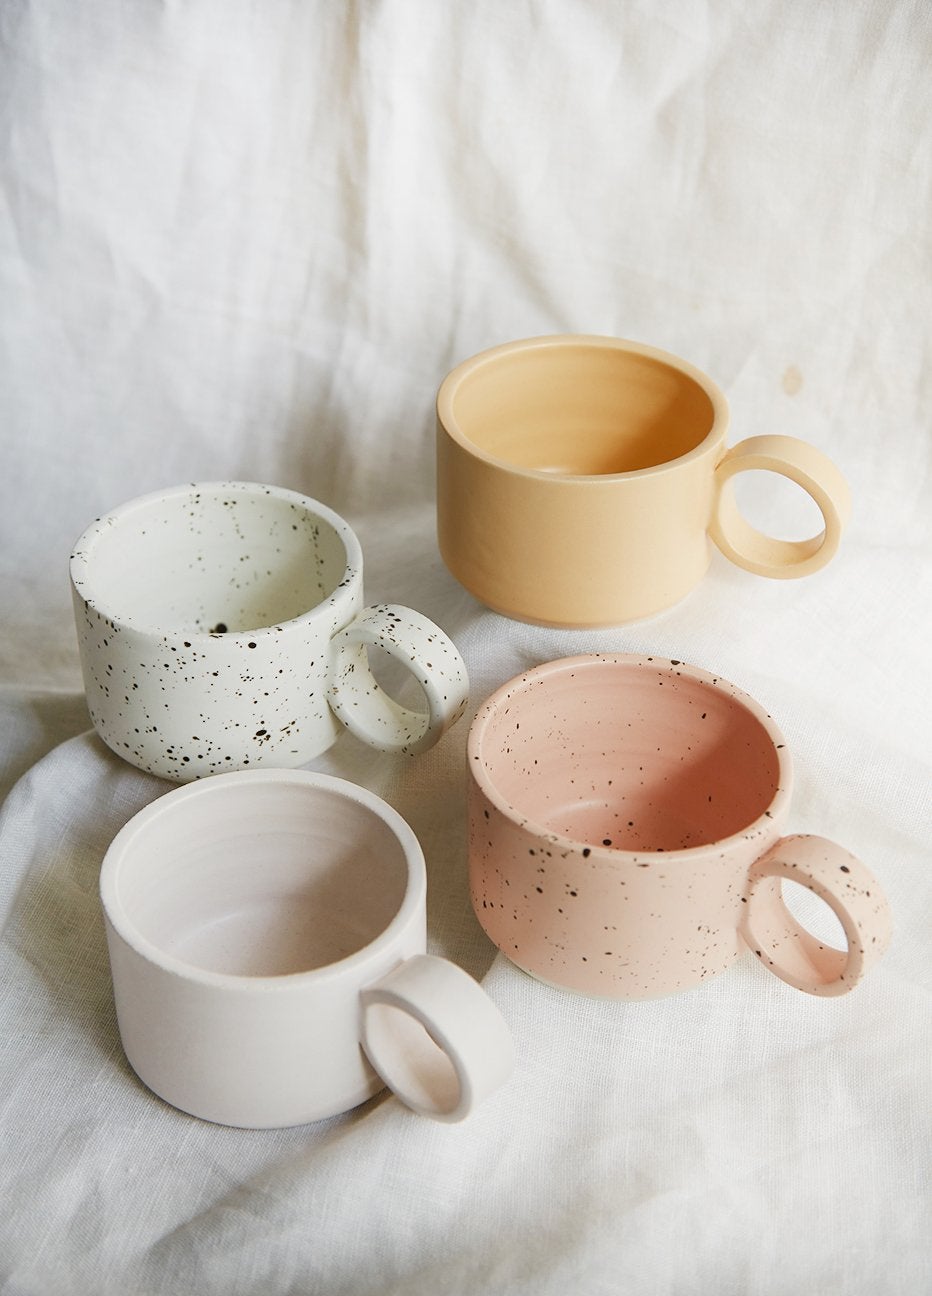 Fun Mug Handles Are the Best Pottery Trend